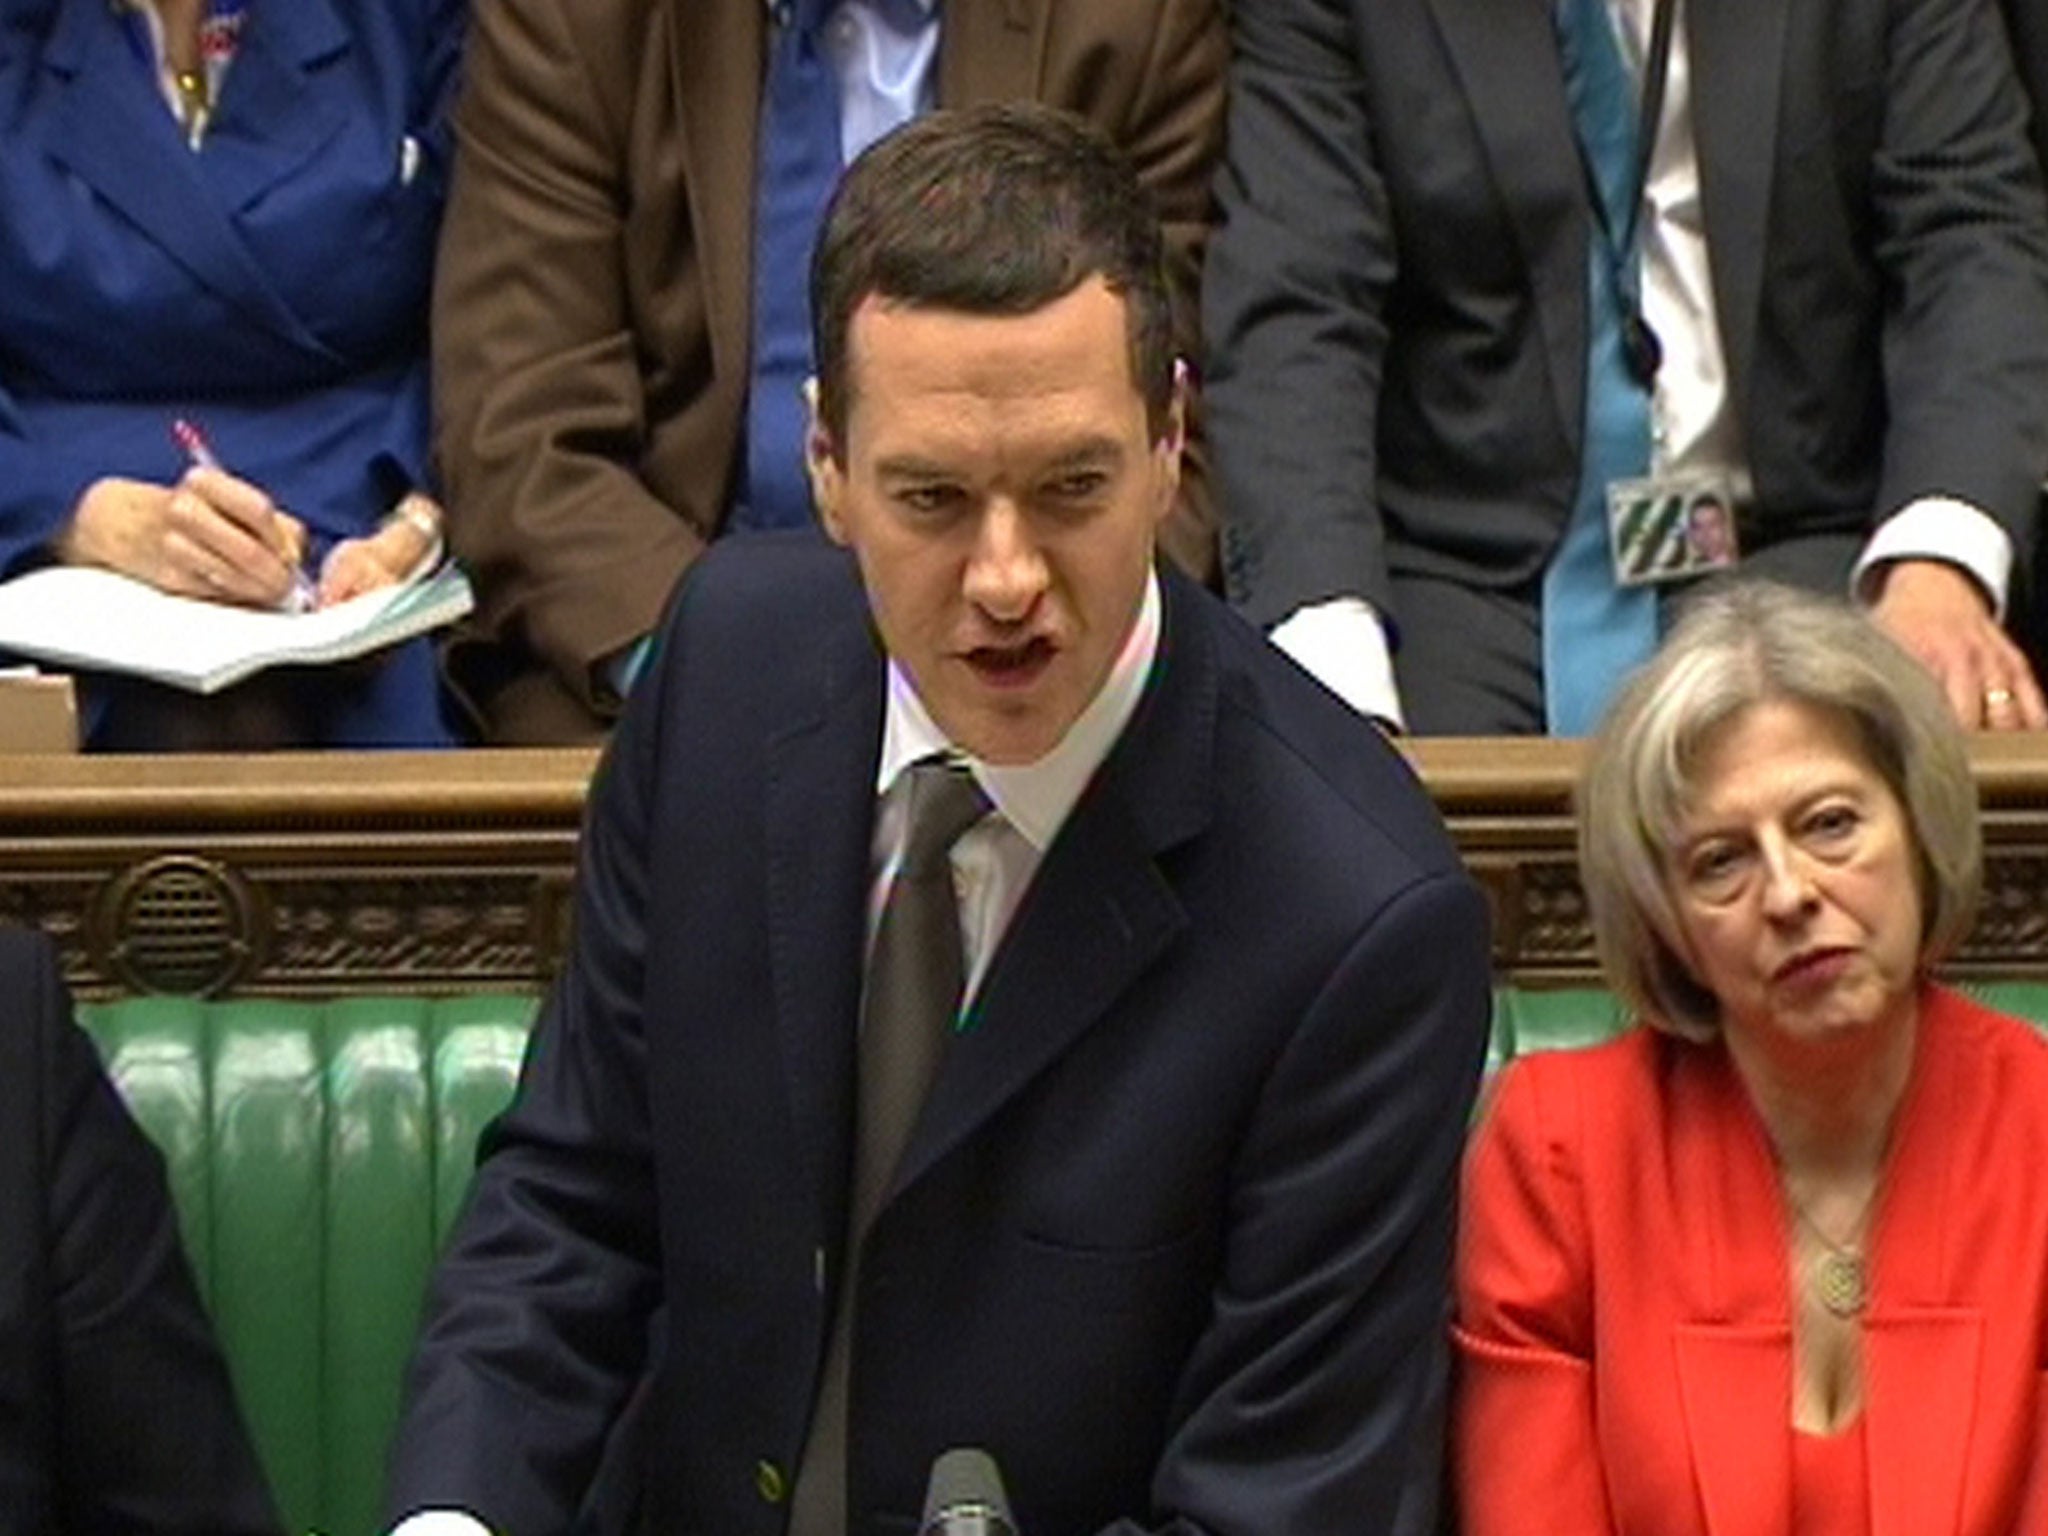 Chancellor of the Exchequer George Osborne delivers his Budget statement to the House of Commons, London